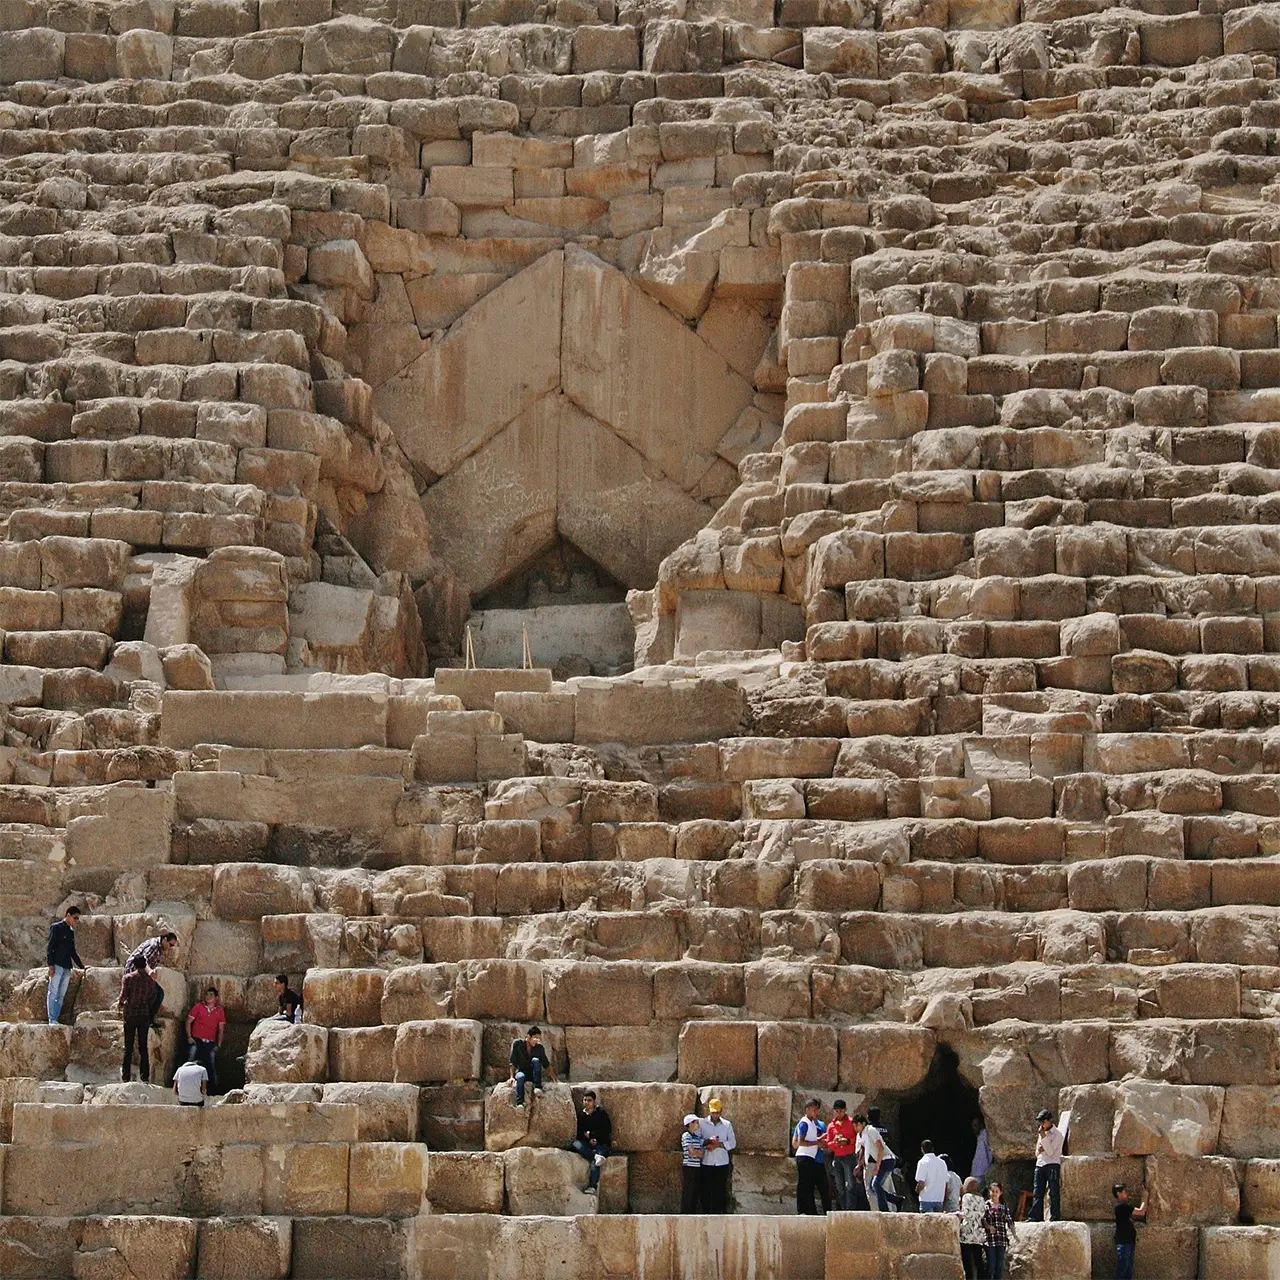 Tourists climbing at the entrance to Khufu (The Great Pyramid) at Giza, Egypt.